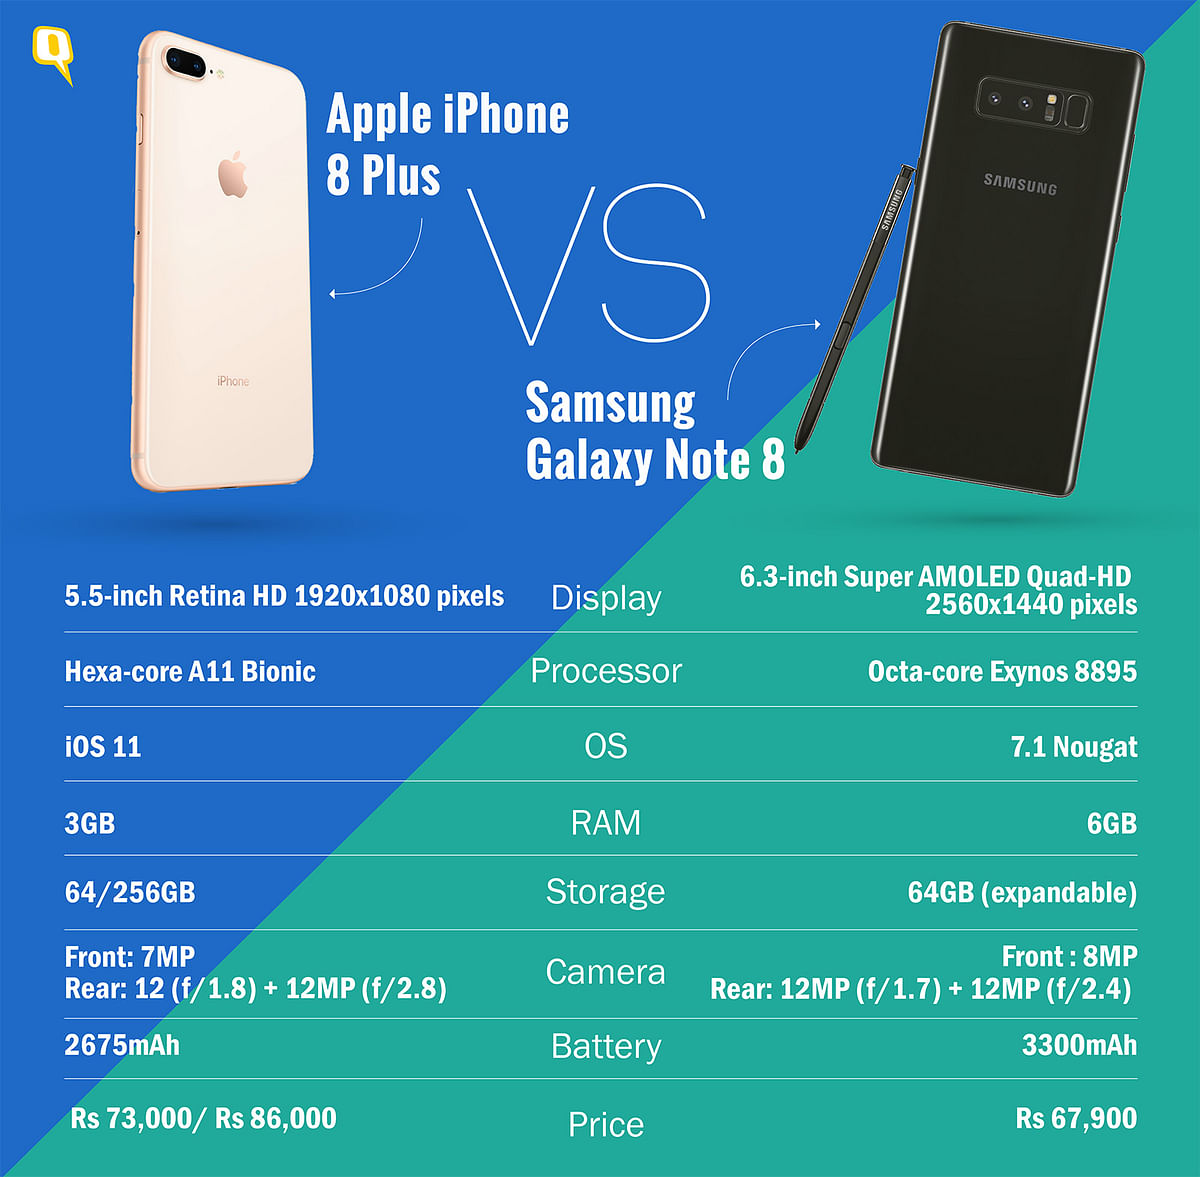 Feature-wise comparison of Samsung Galaxy Note 8 and Apple iPhone 8 Plus. 